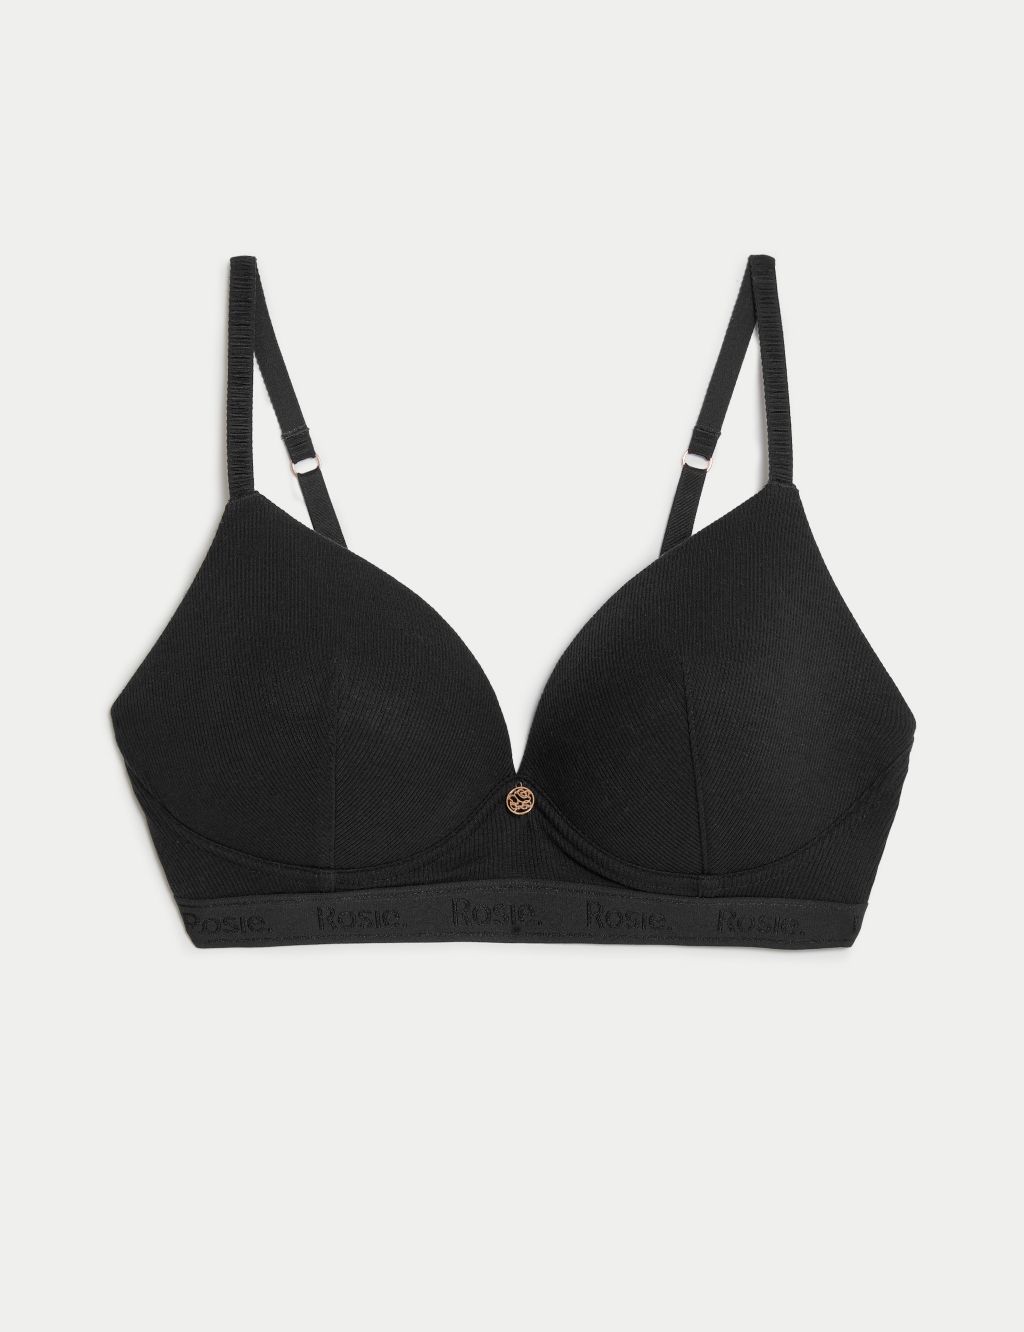 BNWT M&S ROSIE BLACK PADDED NON WIRED BRA SIZE 16 A-C 34-36 RRP £20